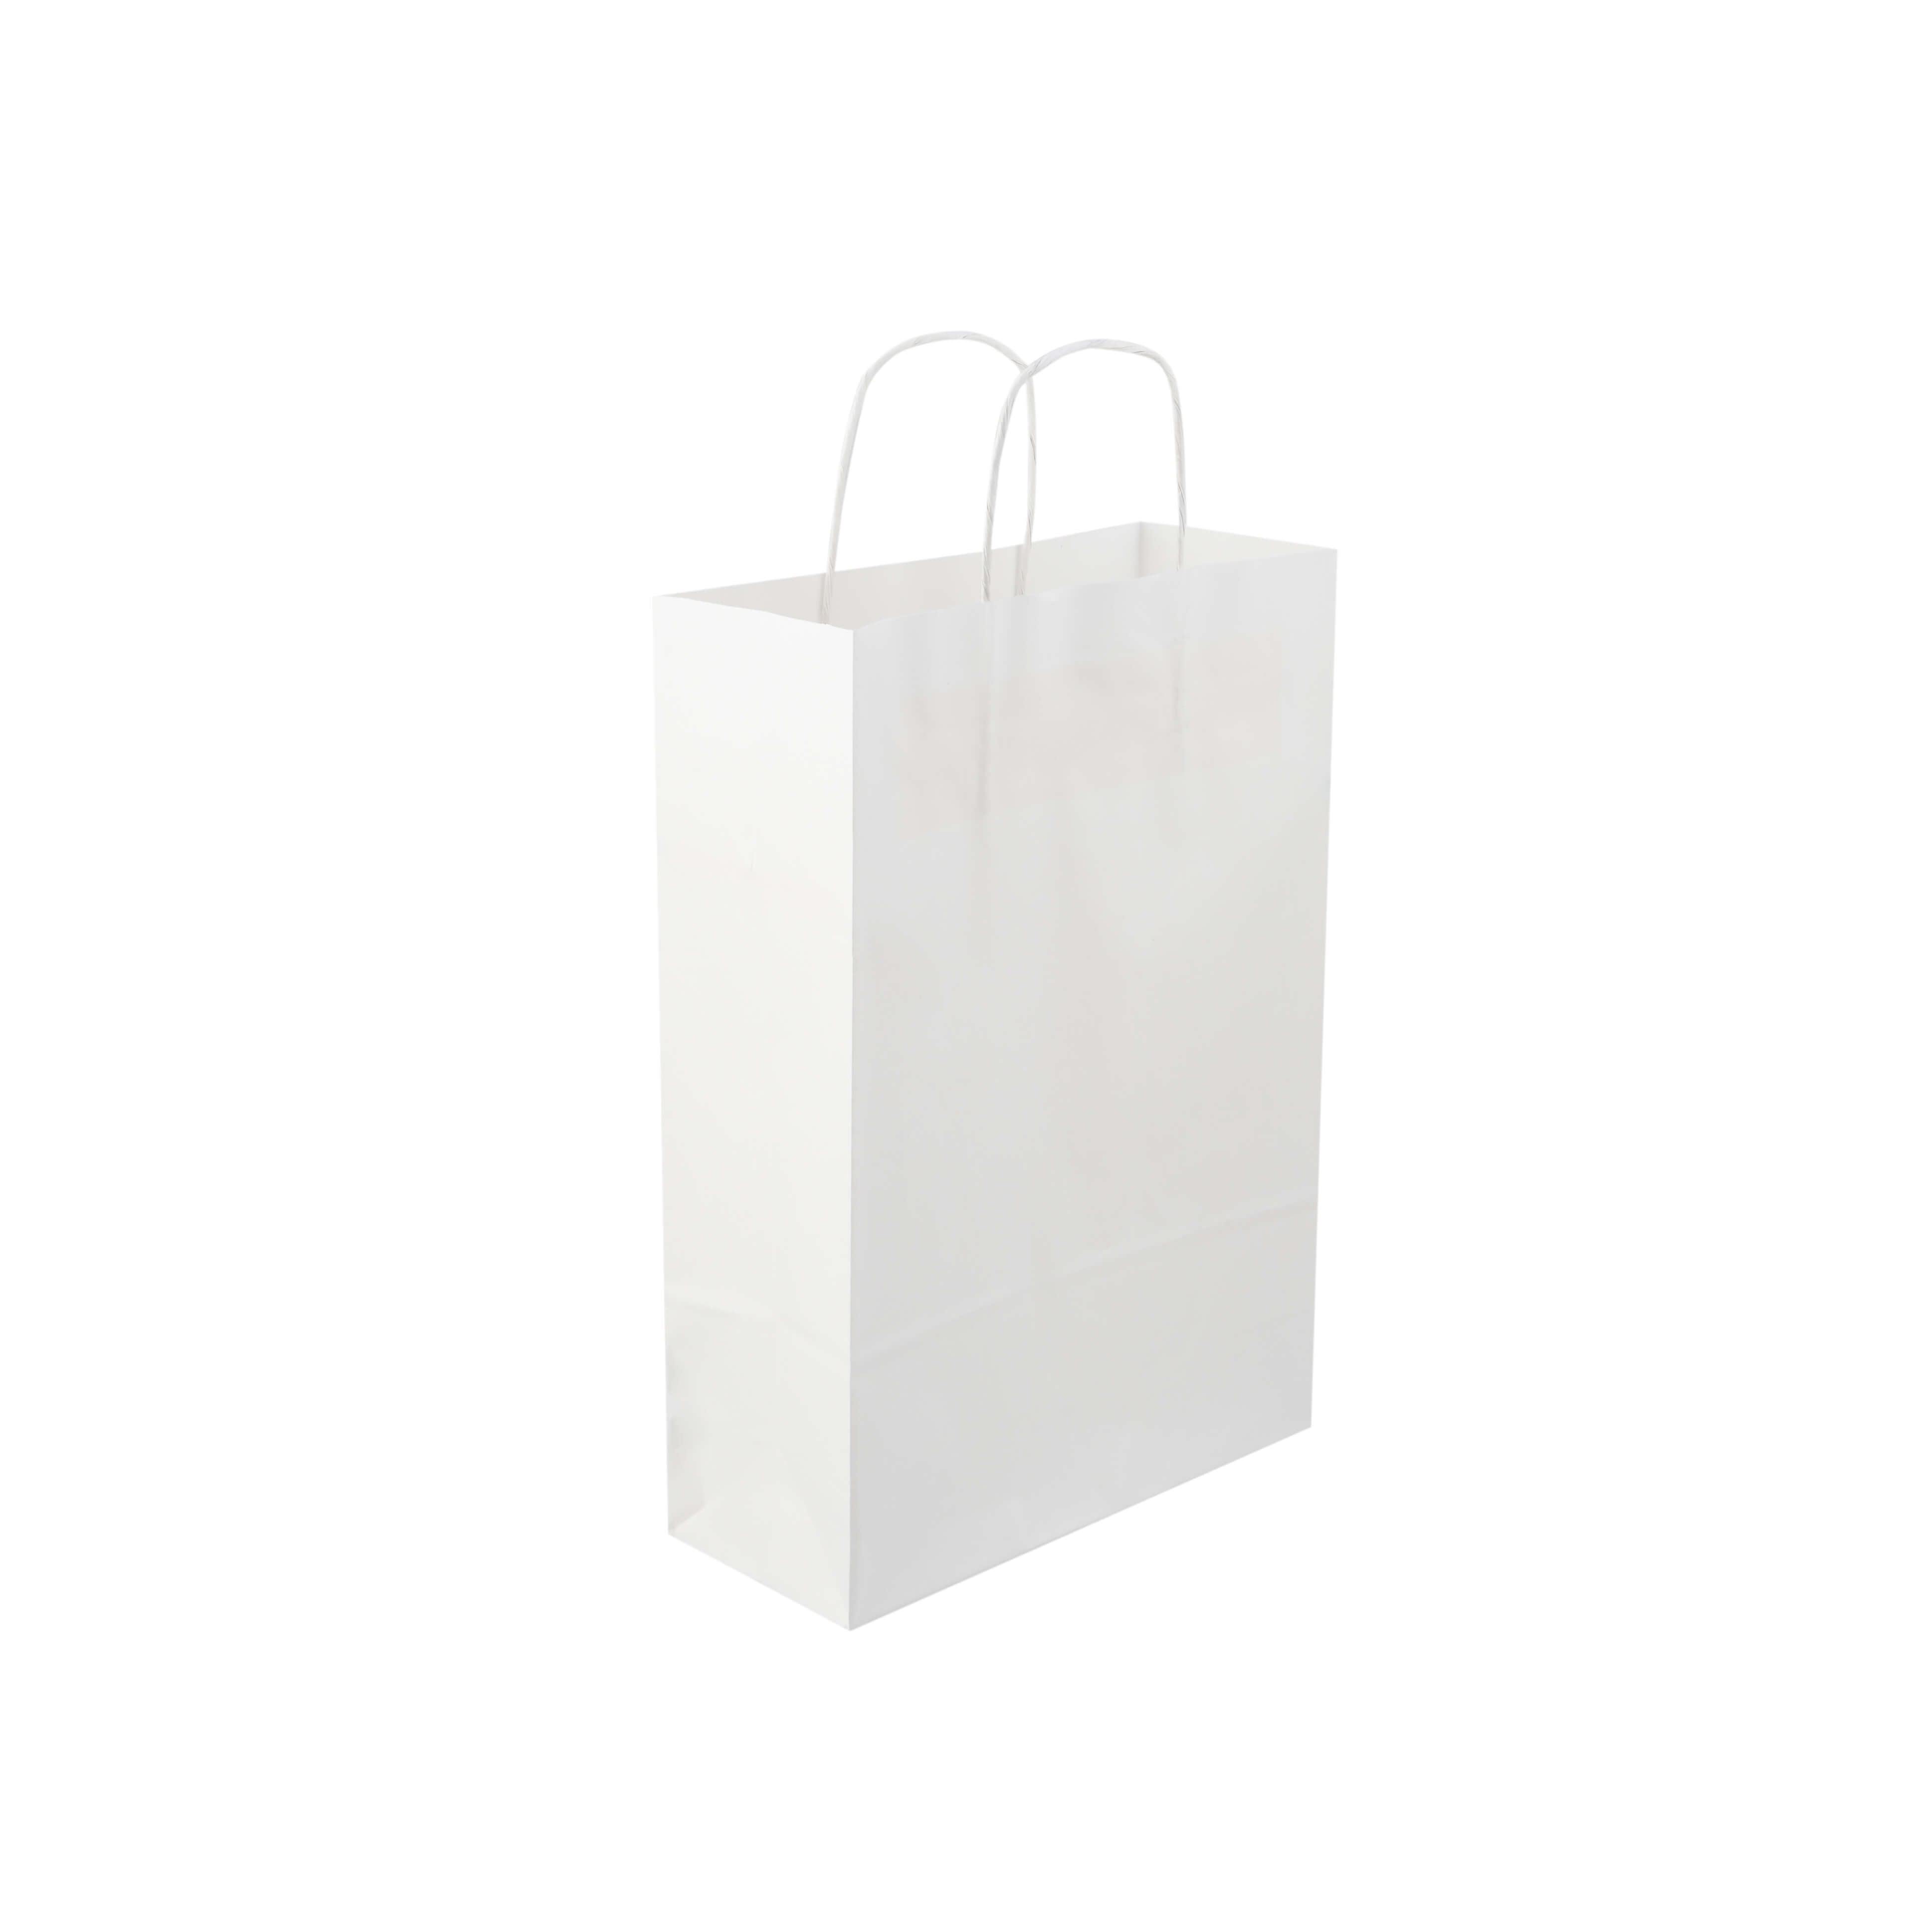 250 Pieces White Twisted Handle Paper Bag